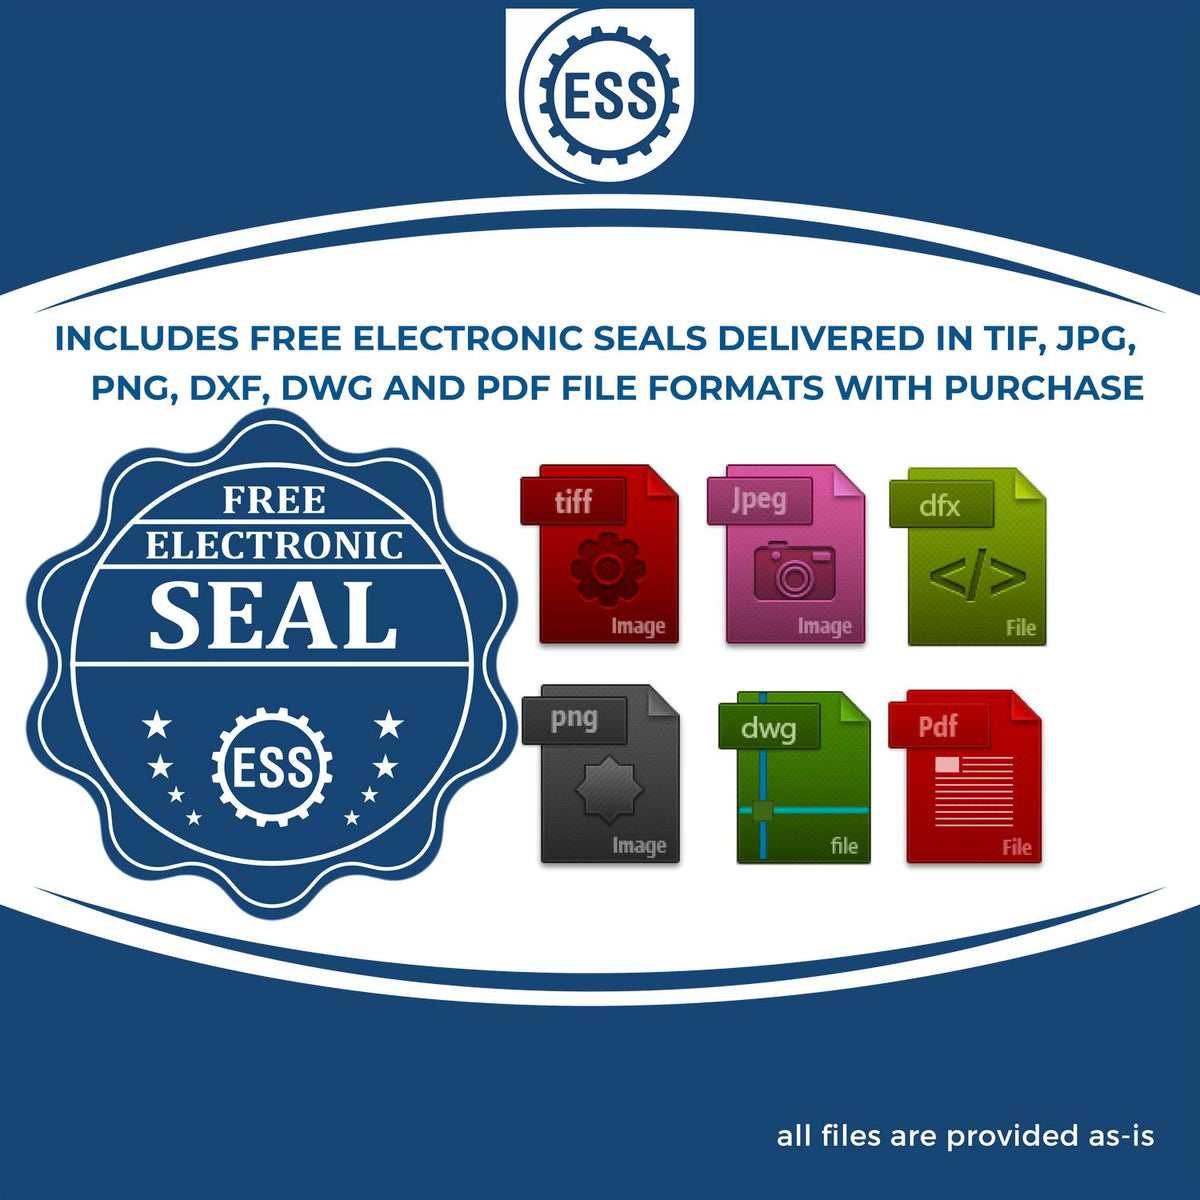 An infographic for the free electronic seal for the State of Vermont Extended Long Reach Engineer Seal illustrating the different file type icons such as DXF, DWG, TIF, JPG and PNG.